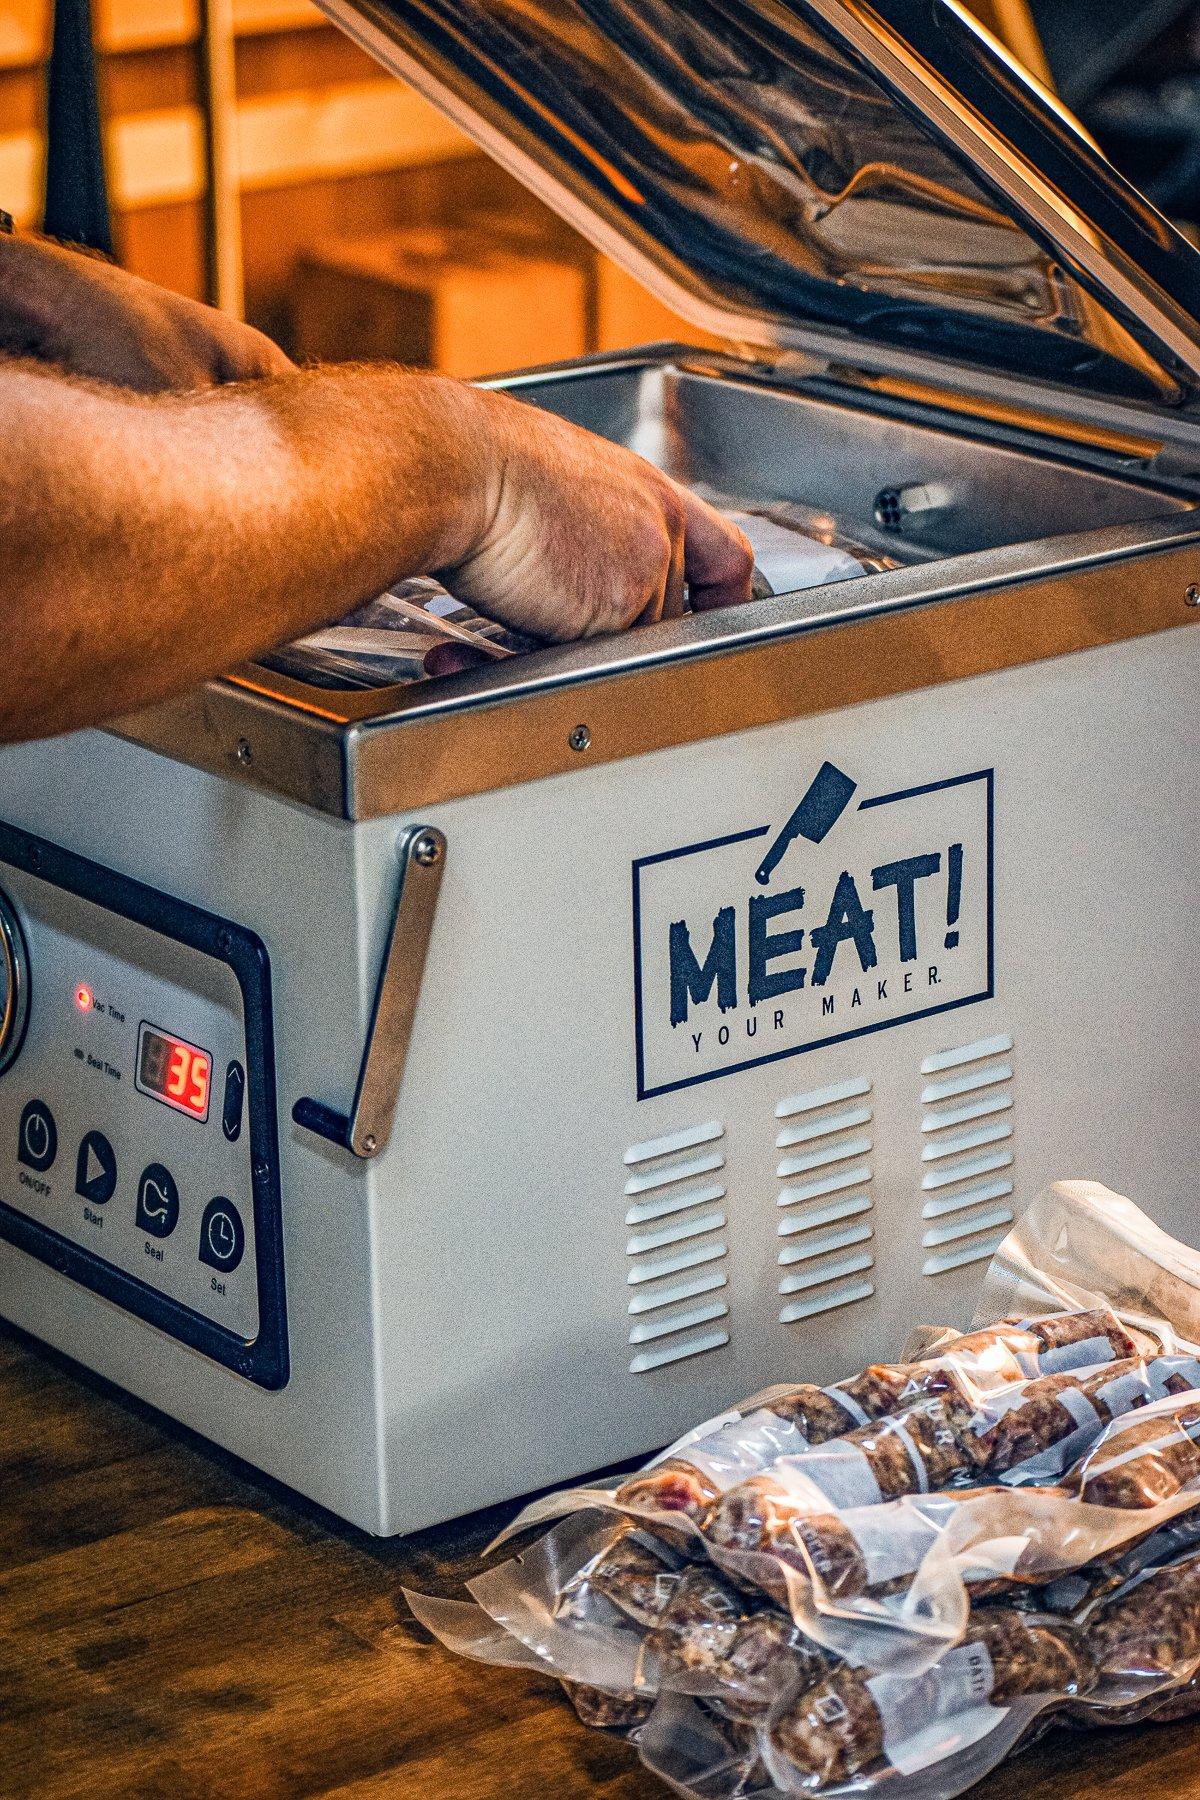 A chamber sealer does the best job at protecting meat for long-term storage.Photo courtesy of MEAT